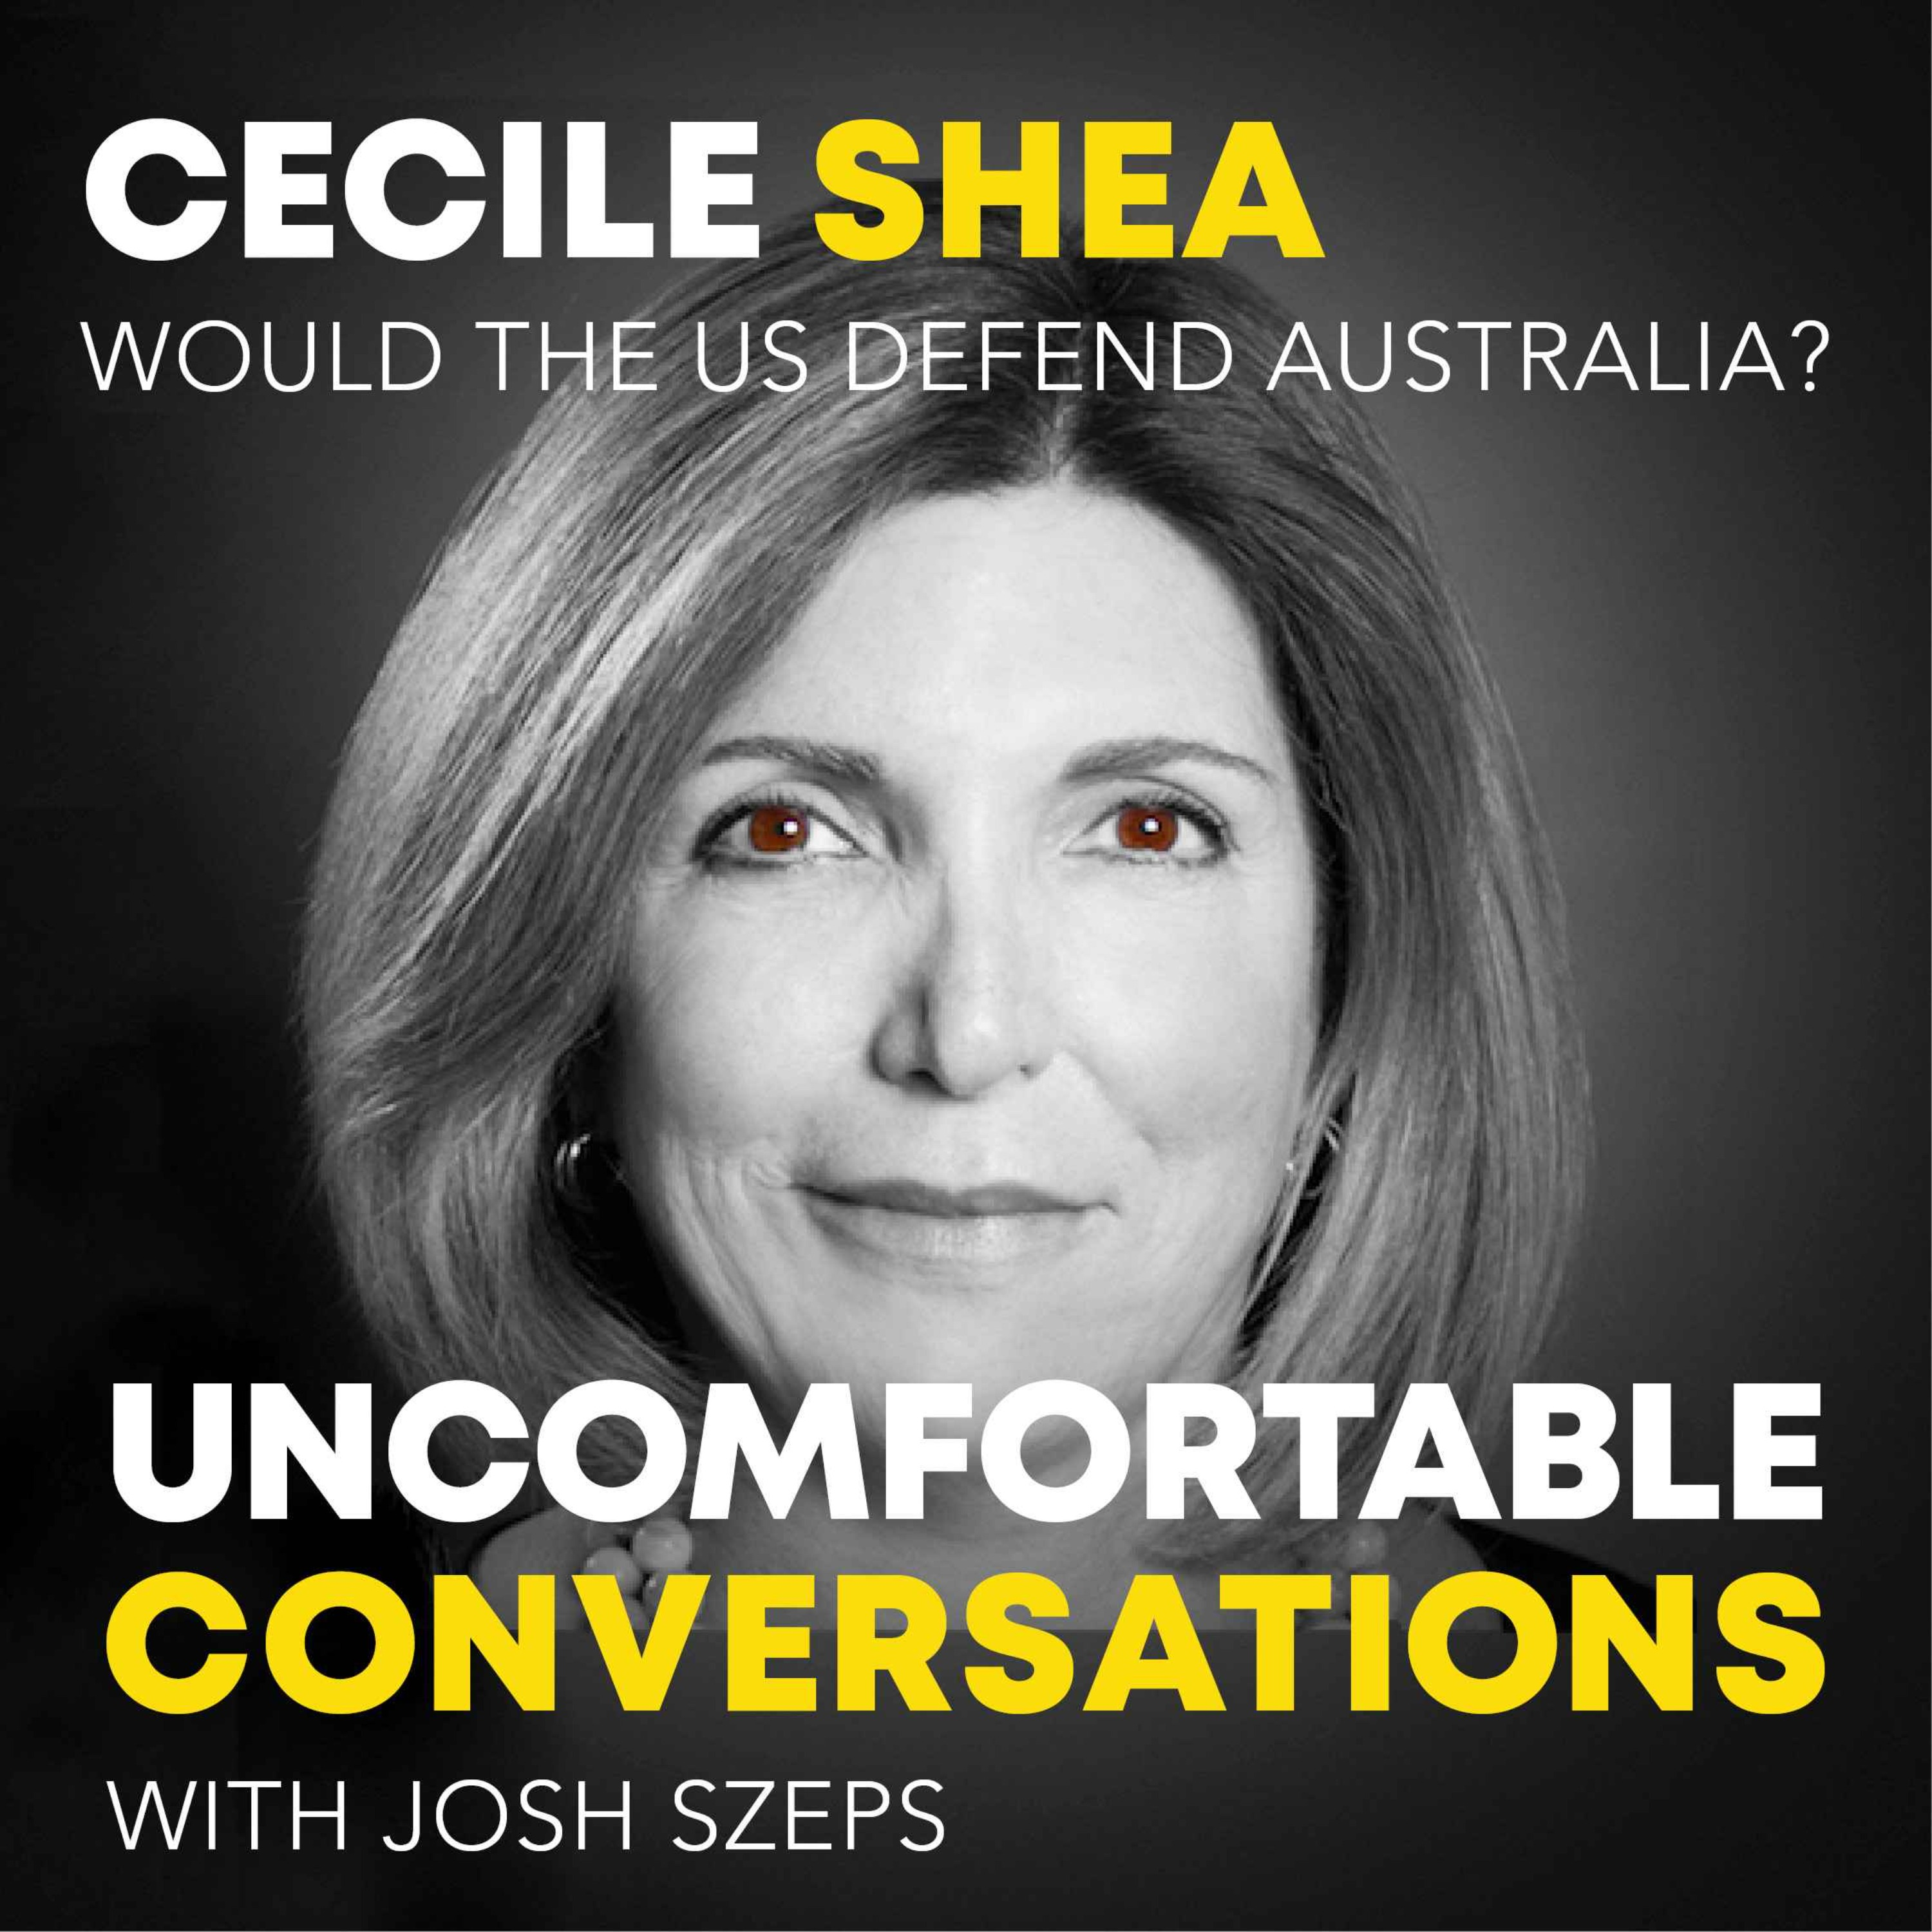 "Would The US Defend Australia?" with Cecile Shea